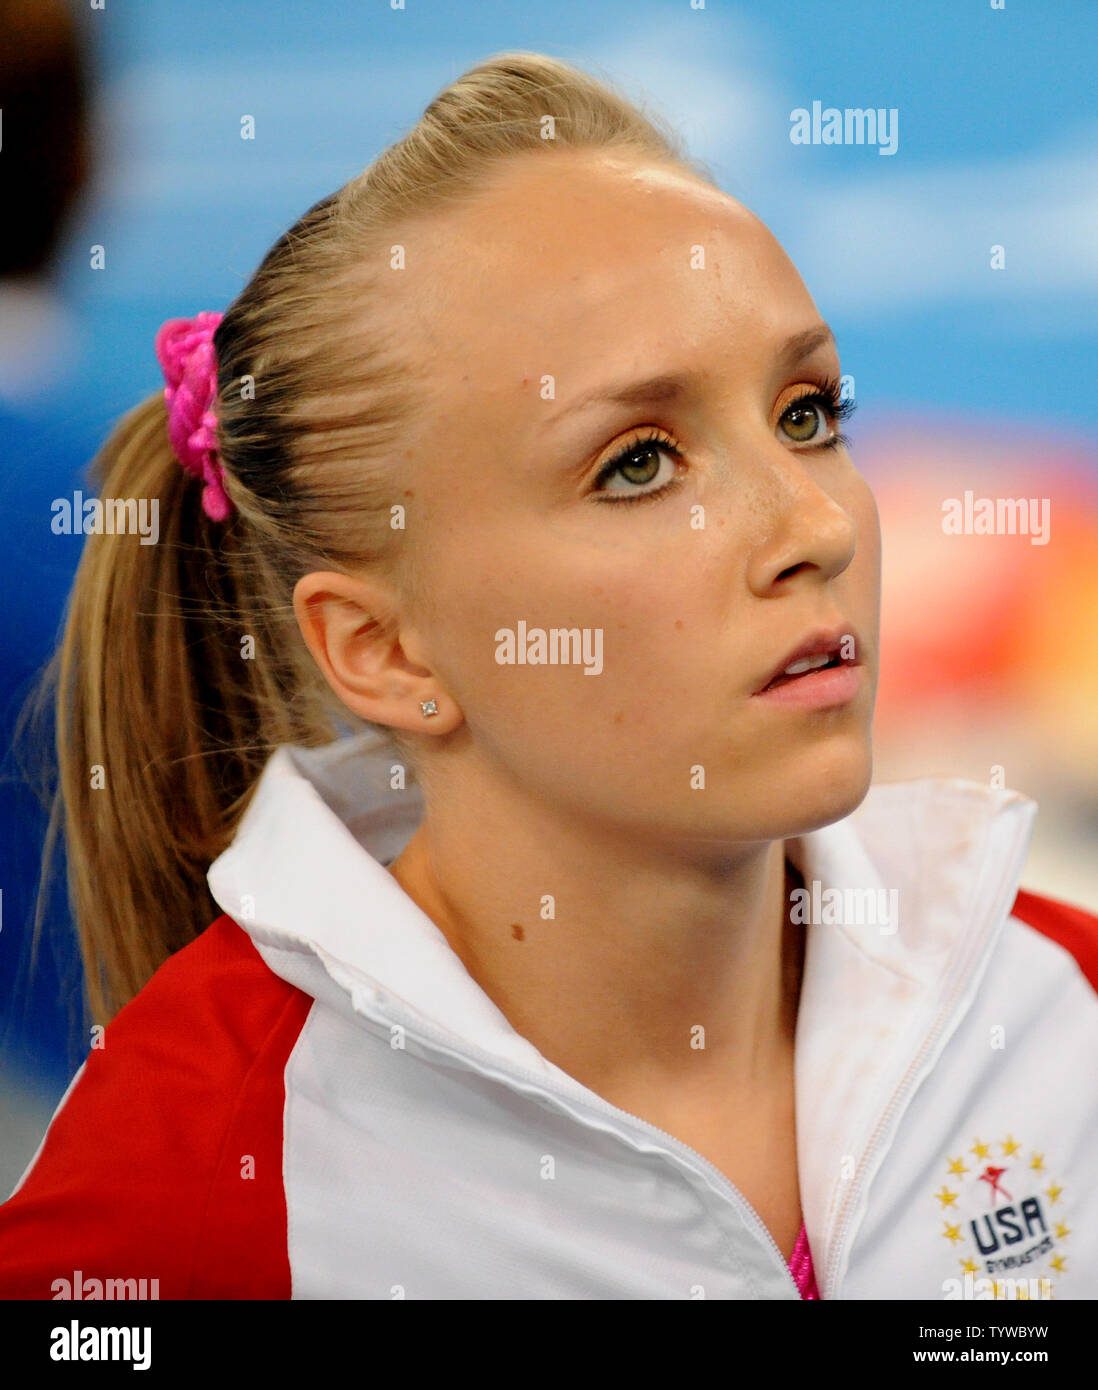 USA's Nastia Liukin is a study of concentration before her performance on the  Balance Beam in the Women's Individual All-Around Gymnastics Final at the National Indoor Stadium at the Summer Olympics in Beijing on August 15, 2008.  Liukin finished first ahead of her teammate Shawn Johnson.  Liukin was born in 1989 in Moscow in the former Soviet Union, now Russia.   (UPI Photo/Pat Benic) Stock Photo